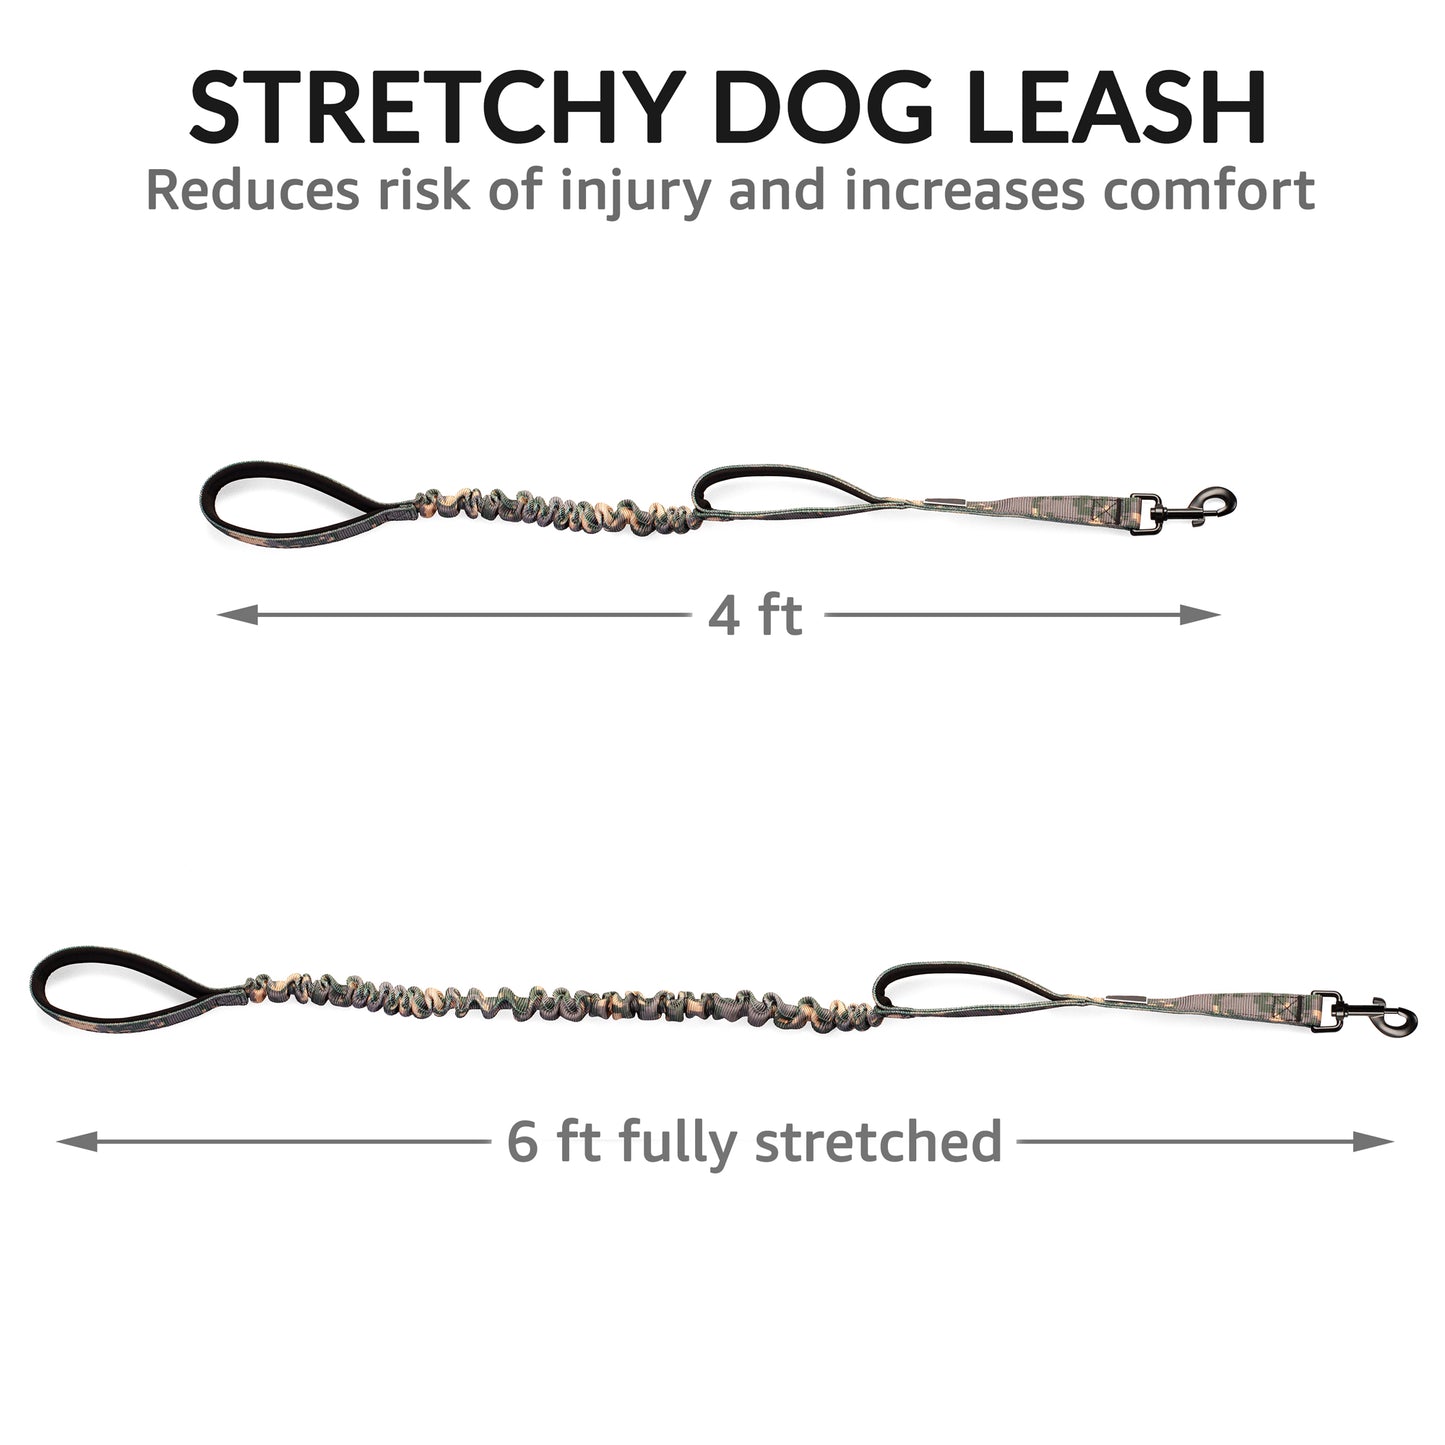 dog leash size 4 ft, 6 ft fully stretched